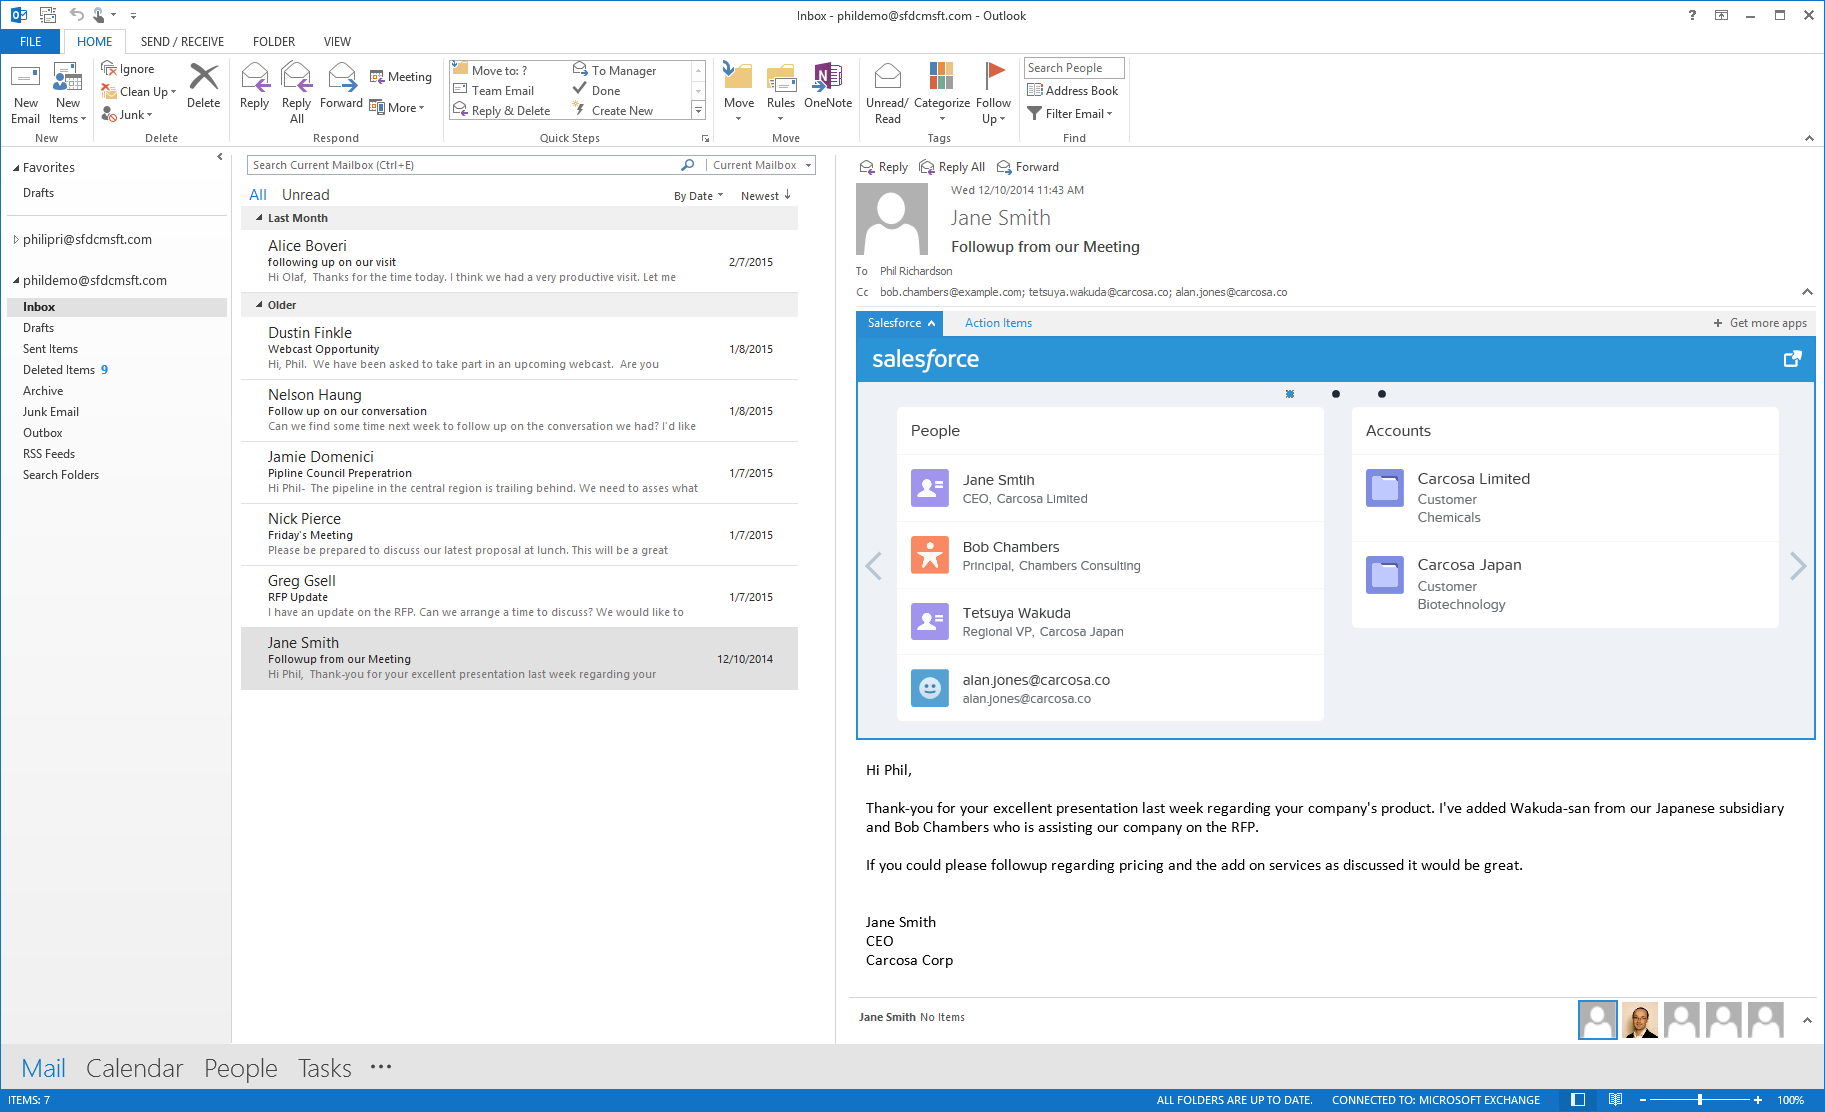 how to sync office 365 outlook